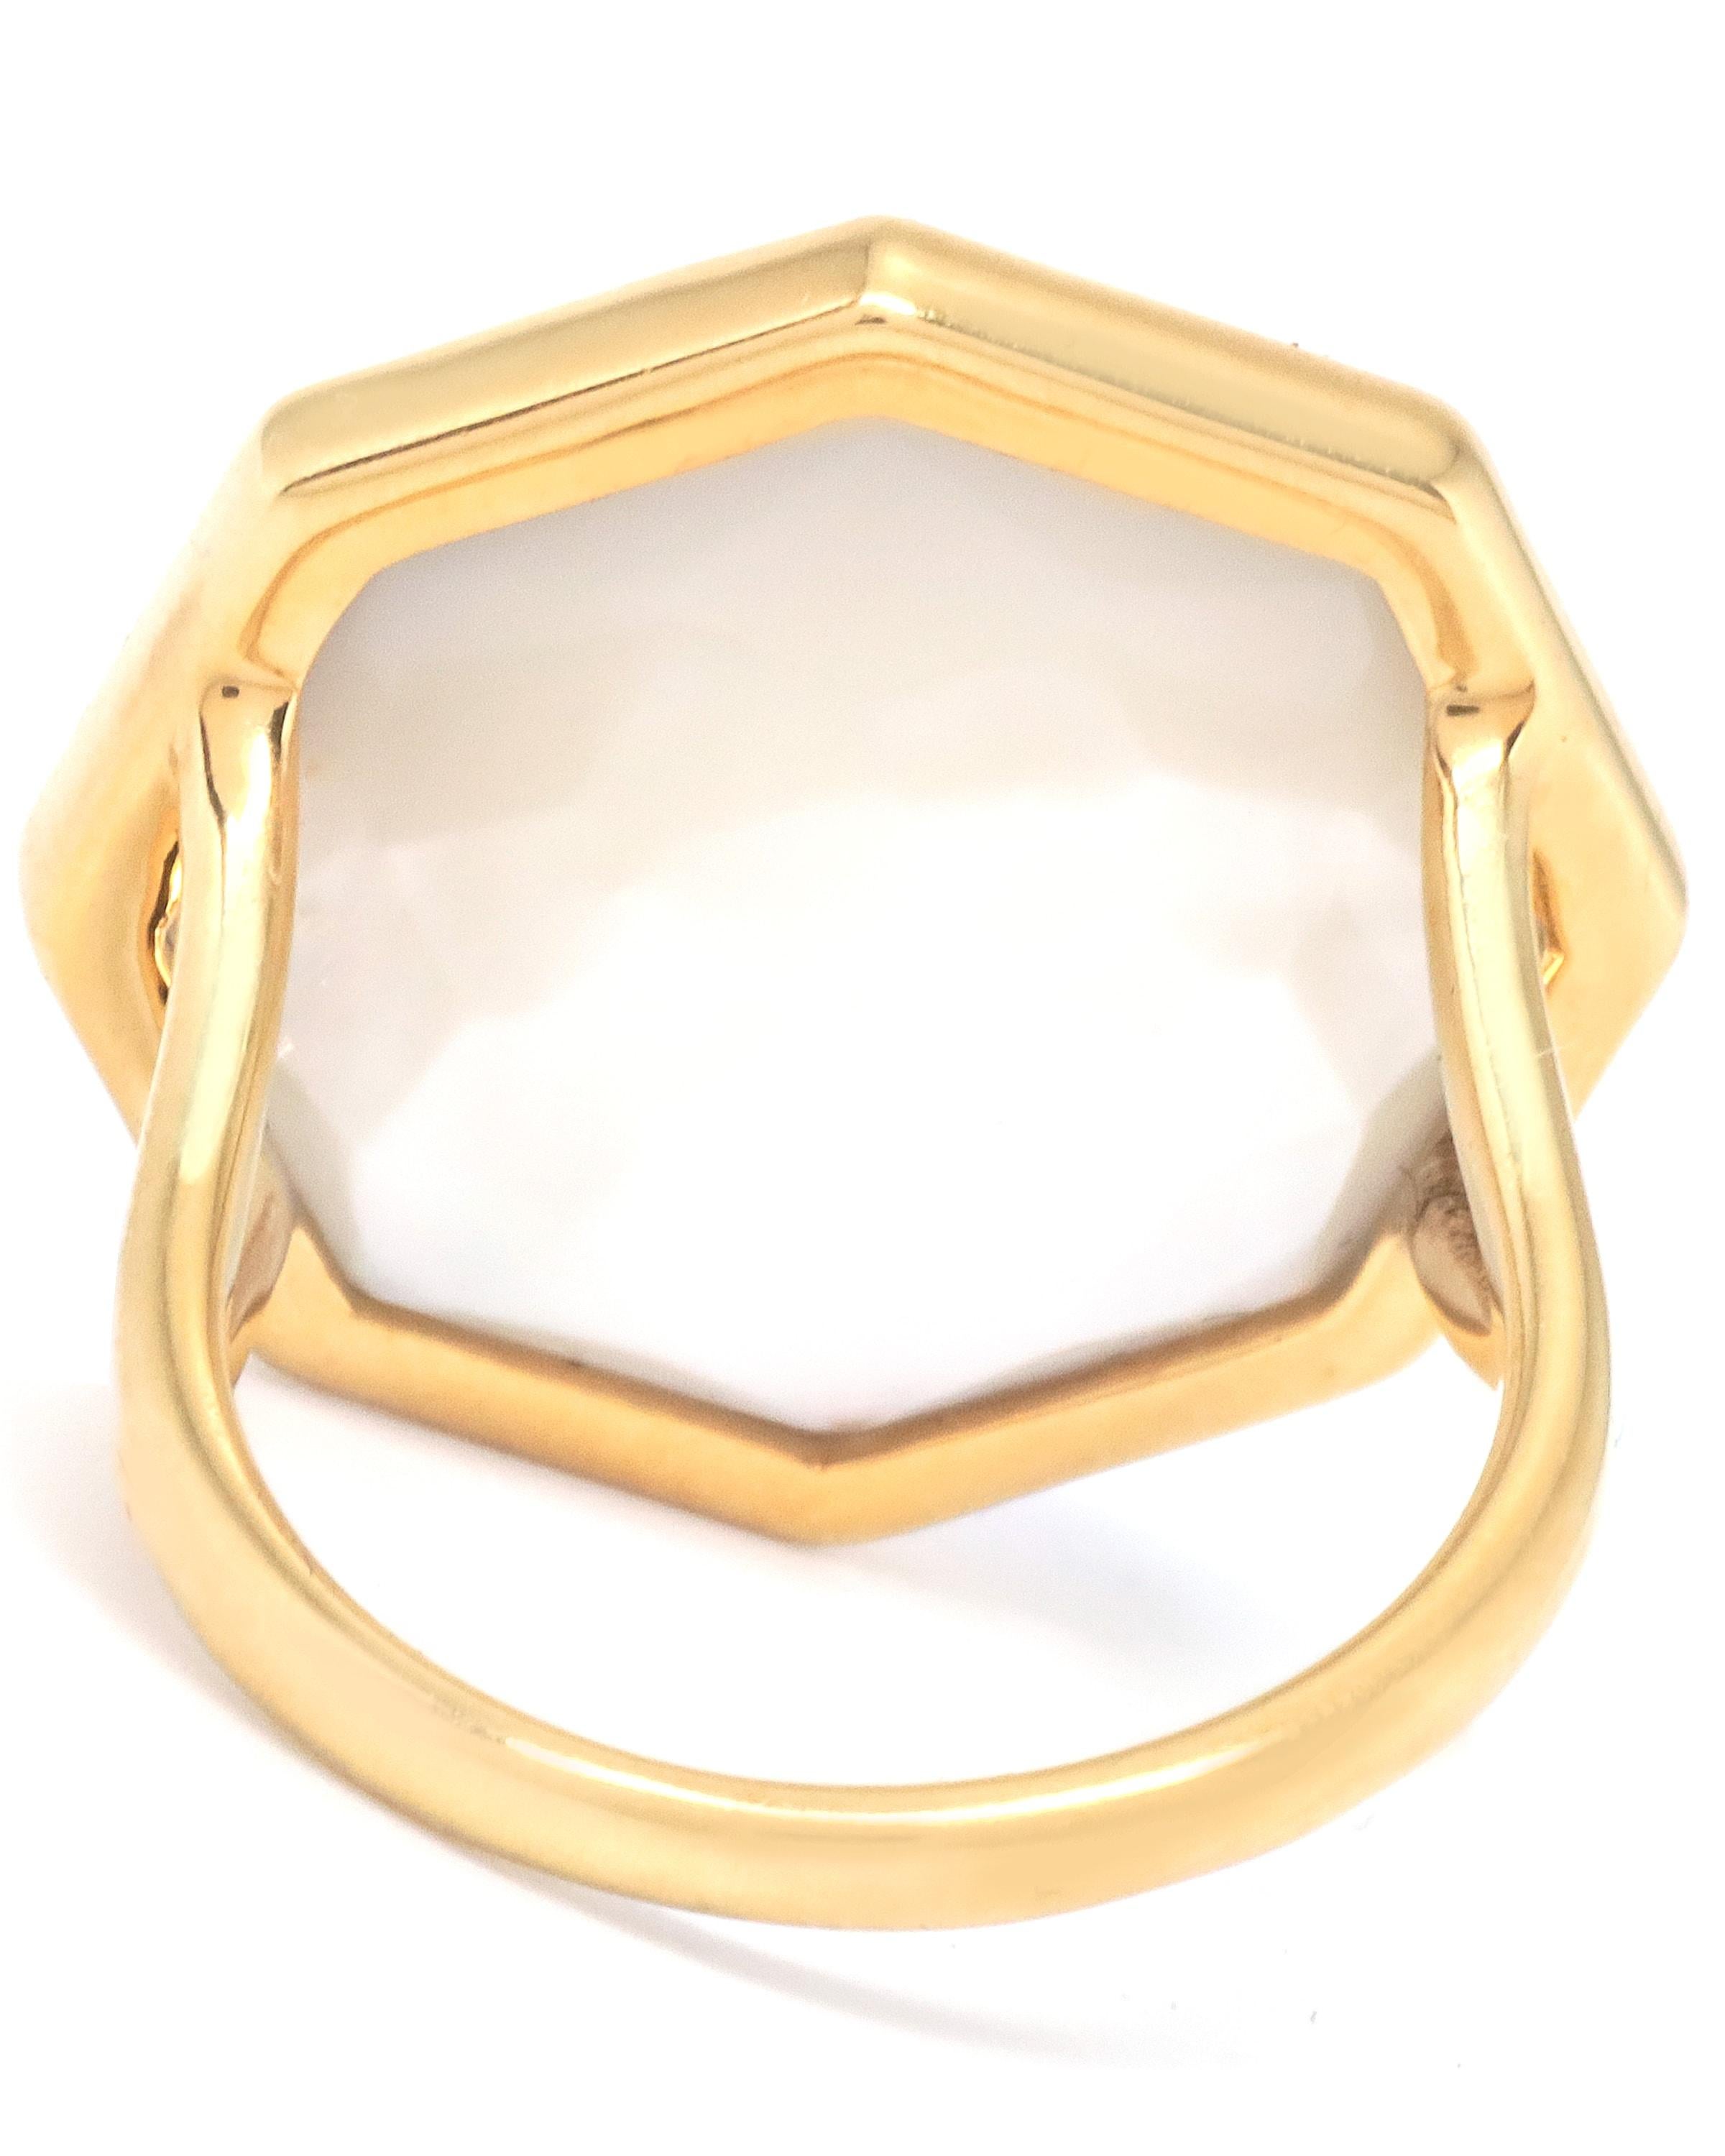 IPPOLITA 18K Rock Candy Large Octagon Stone Ring in Amethyst and Mother-of-Pearl Doublet GR551DFAMMOP Ring Size 7. Shipped in Ippolita Pouch. Manufacturers Suggested Retail Price $2995